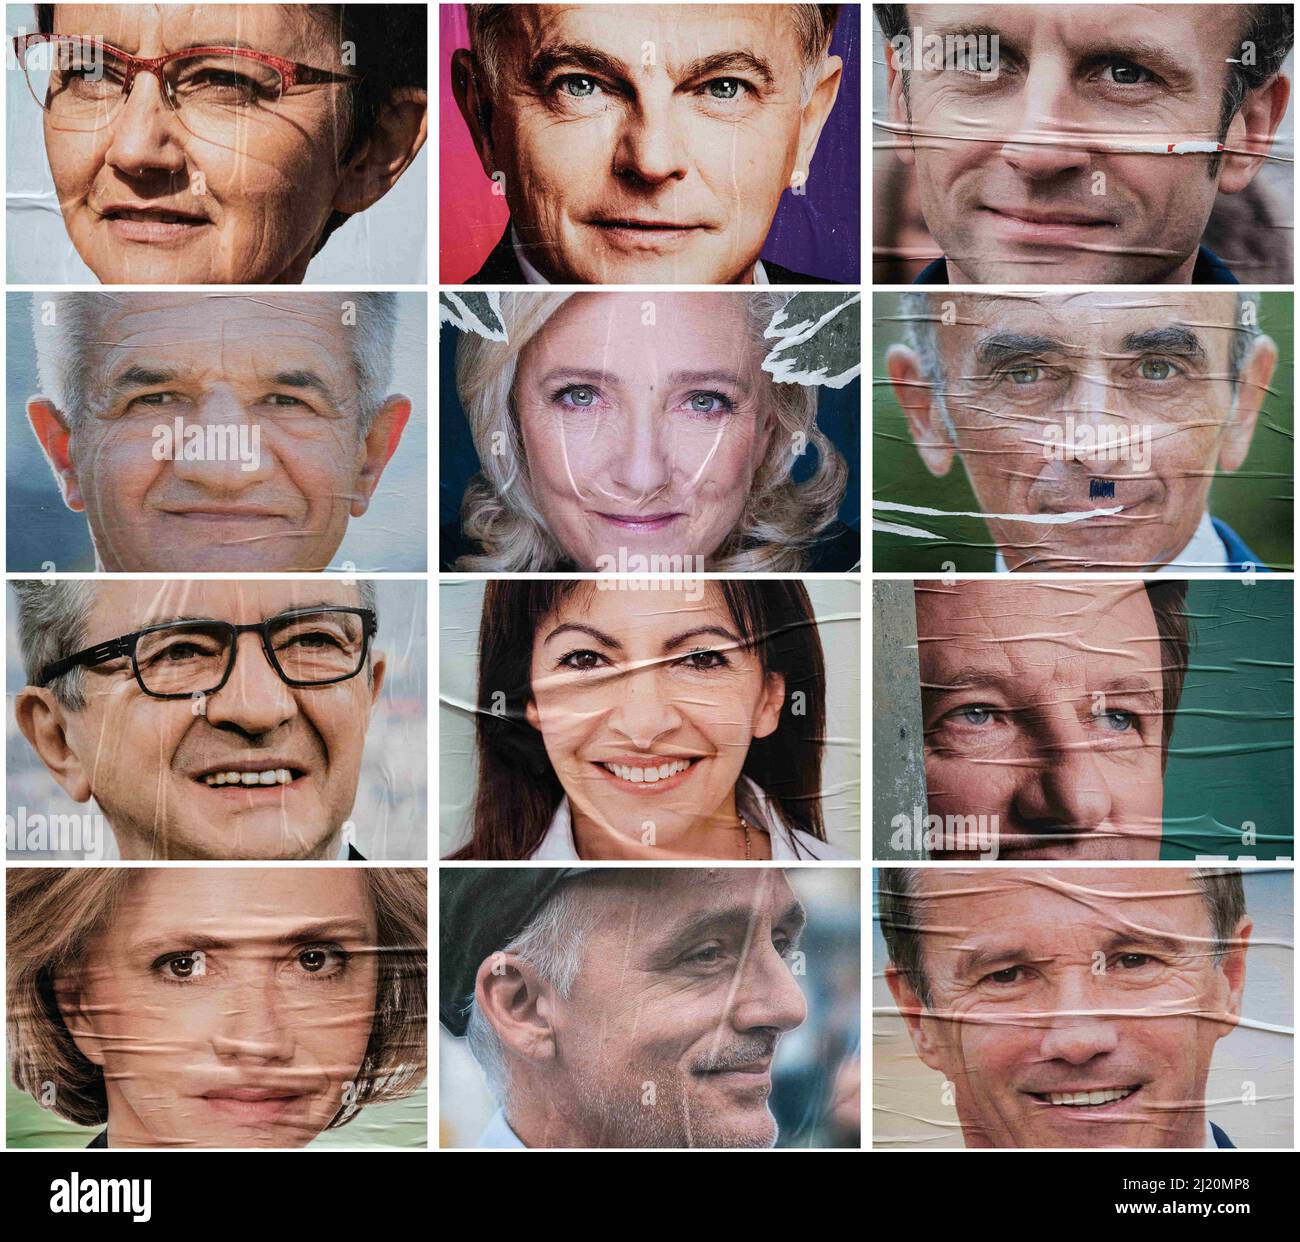 Patchwork with Nathalie ARTHAUD, Fabien ROUSSEL, Emmanuel MACRON, Jean LASSALLE, Marine LE PEN, Eric ZEMMOUR, Jean-Luc MELENCHON, Anne HIDALGO. Fifteen days before the first round of the 2022 presidential elections, the official panels are available for the posters of each candidate. Toulouse, France, March 28, 2022. Monday 28th March marks the official beginning of presidential campaign season. The number of candidates running has already been cut down to 12 after a number of figures failed to gather enough parrainages, or signatures of support. Photo by Patrick Batard/ABACAPRESS.COM Stock Photo